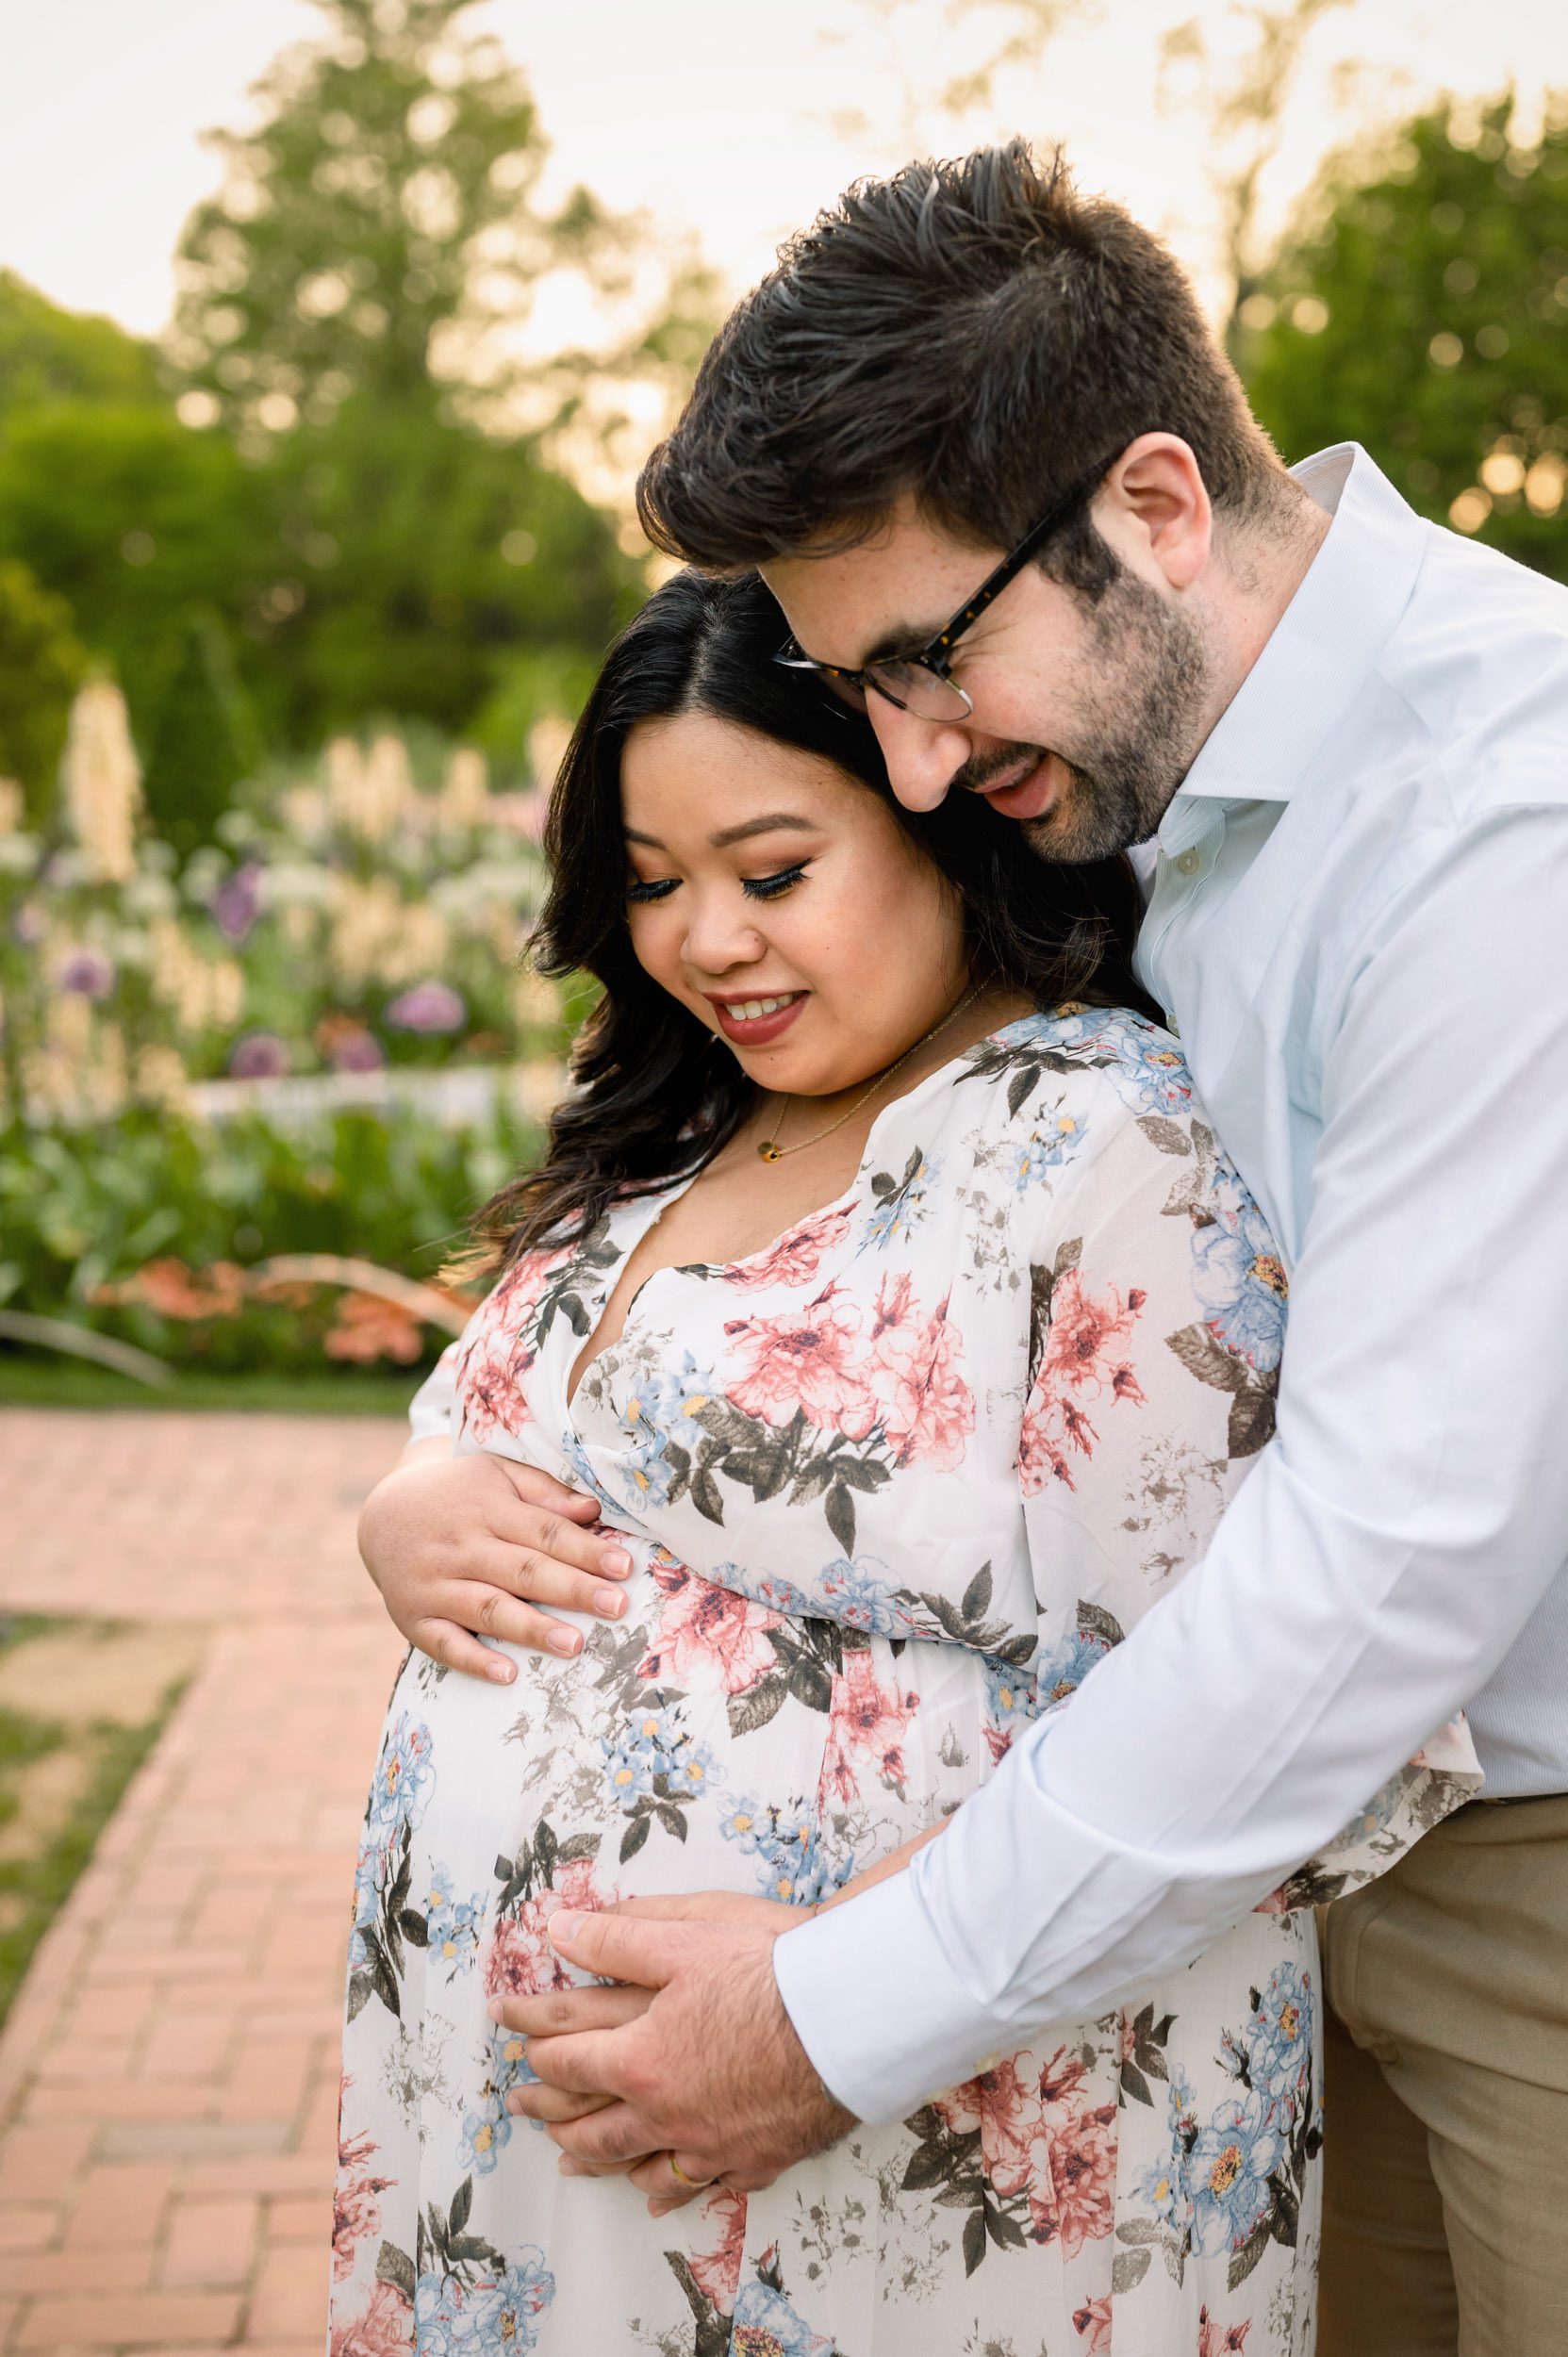 an expecting couple standing on a brick pathway with colorful flowers blooming all around them as dad hugs mom from behind and they both smile down at her belly during a maternity photo session